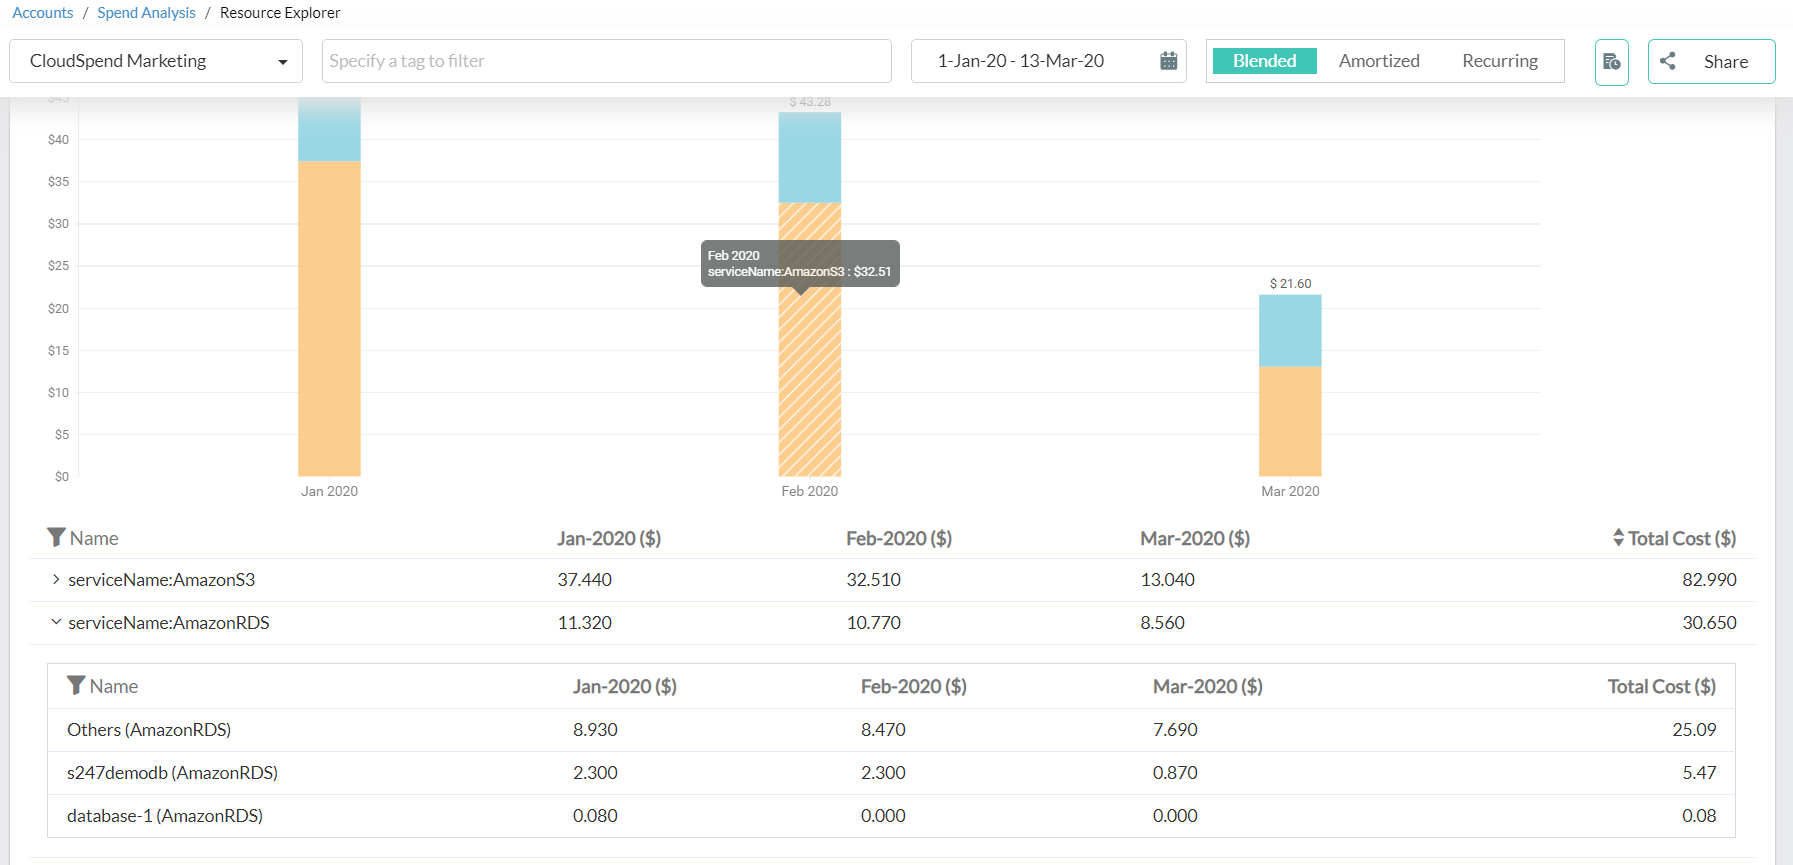 Account splitup view of cloud cost based on service